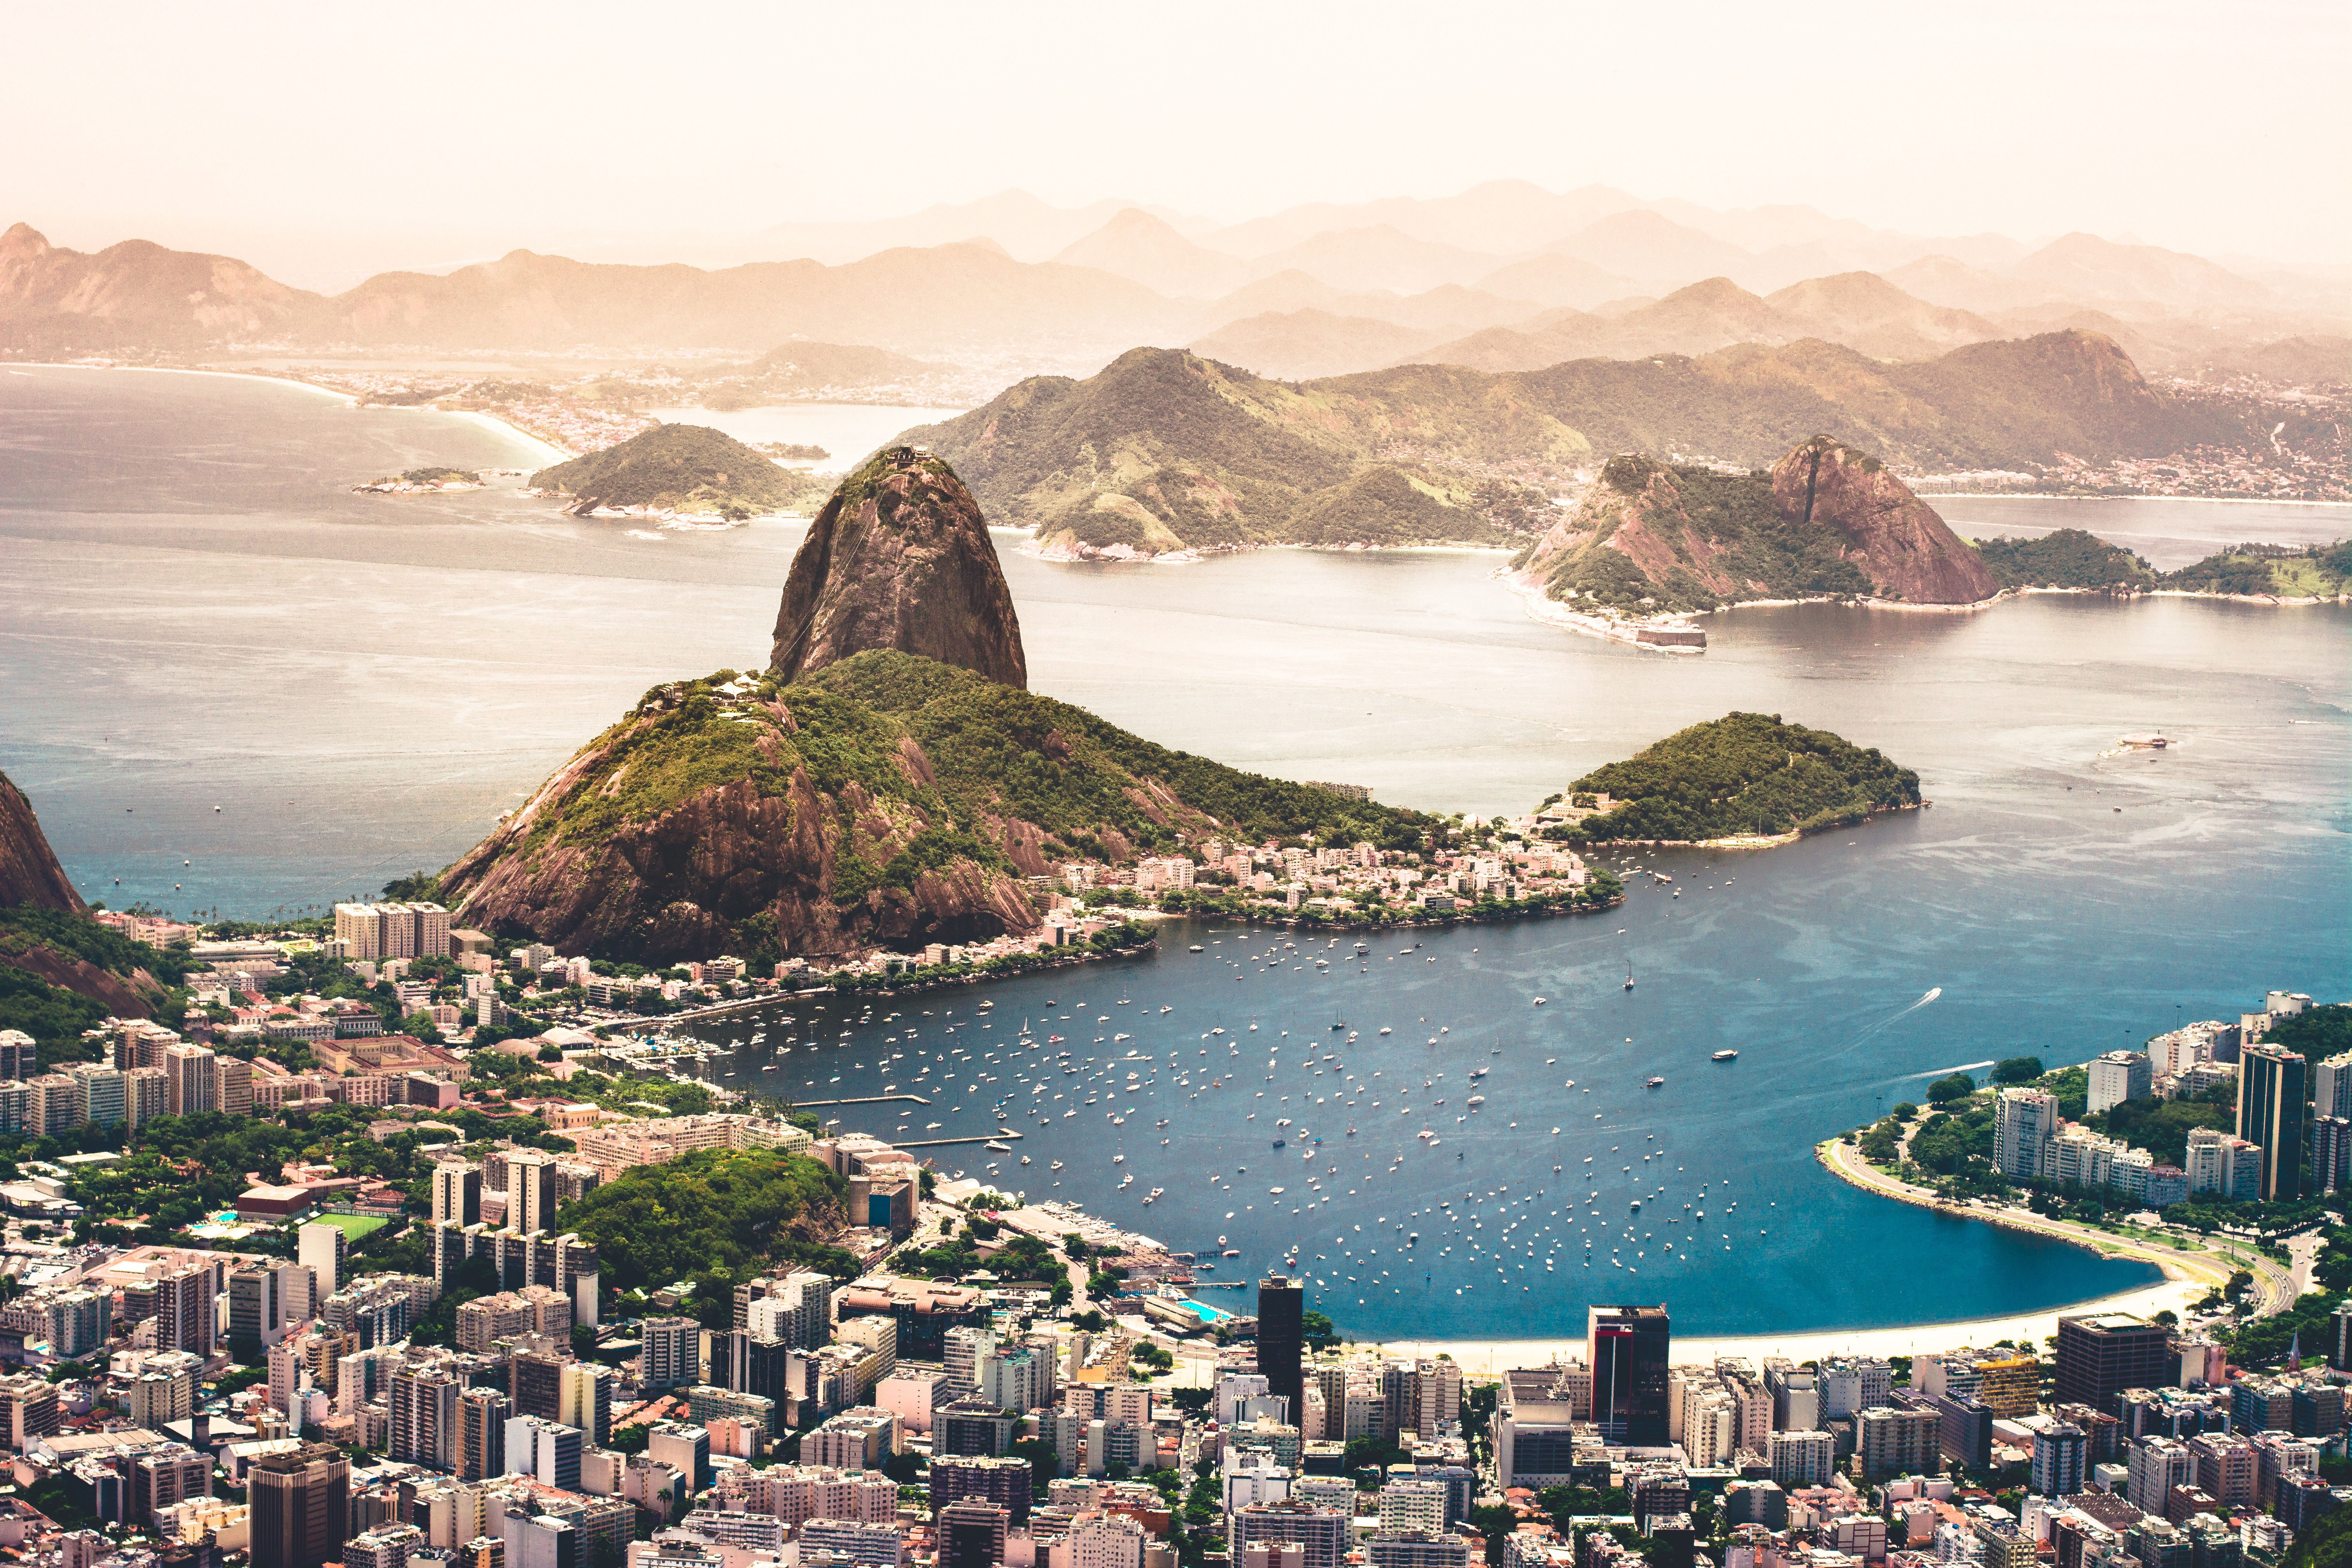 In LVoe with Louis Vuitton: From Rio de Janeiro with LVoe